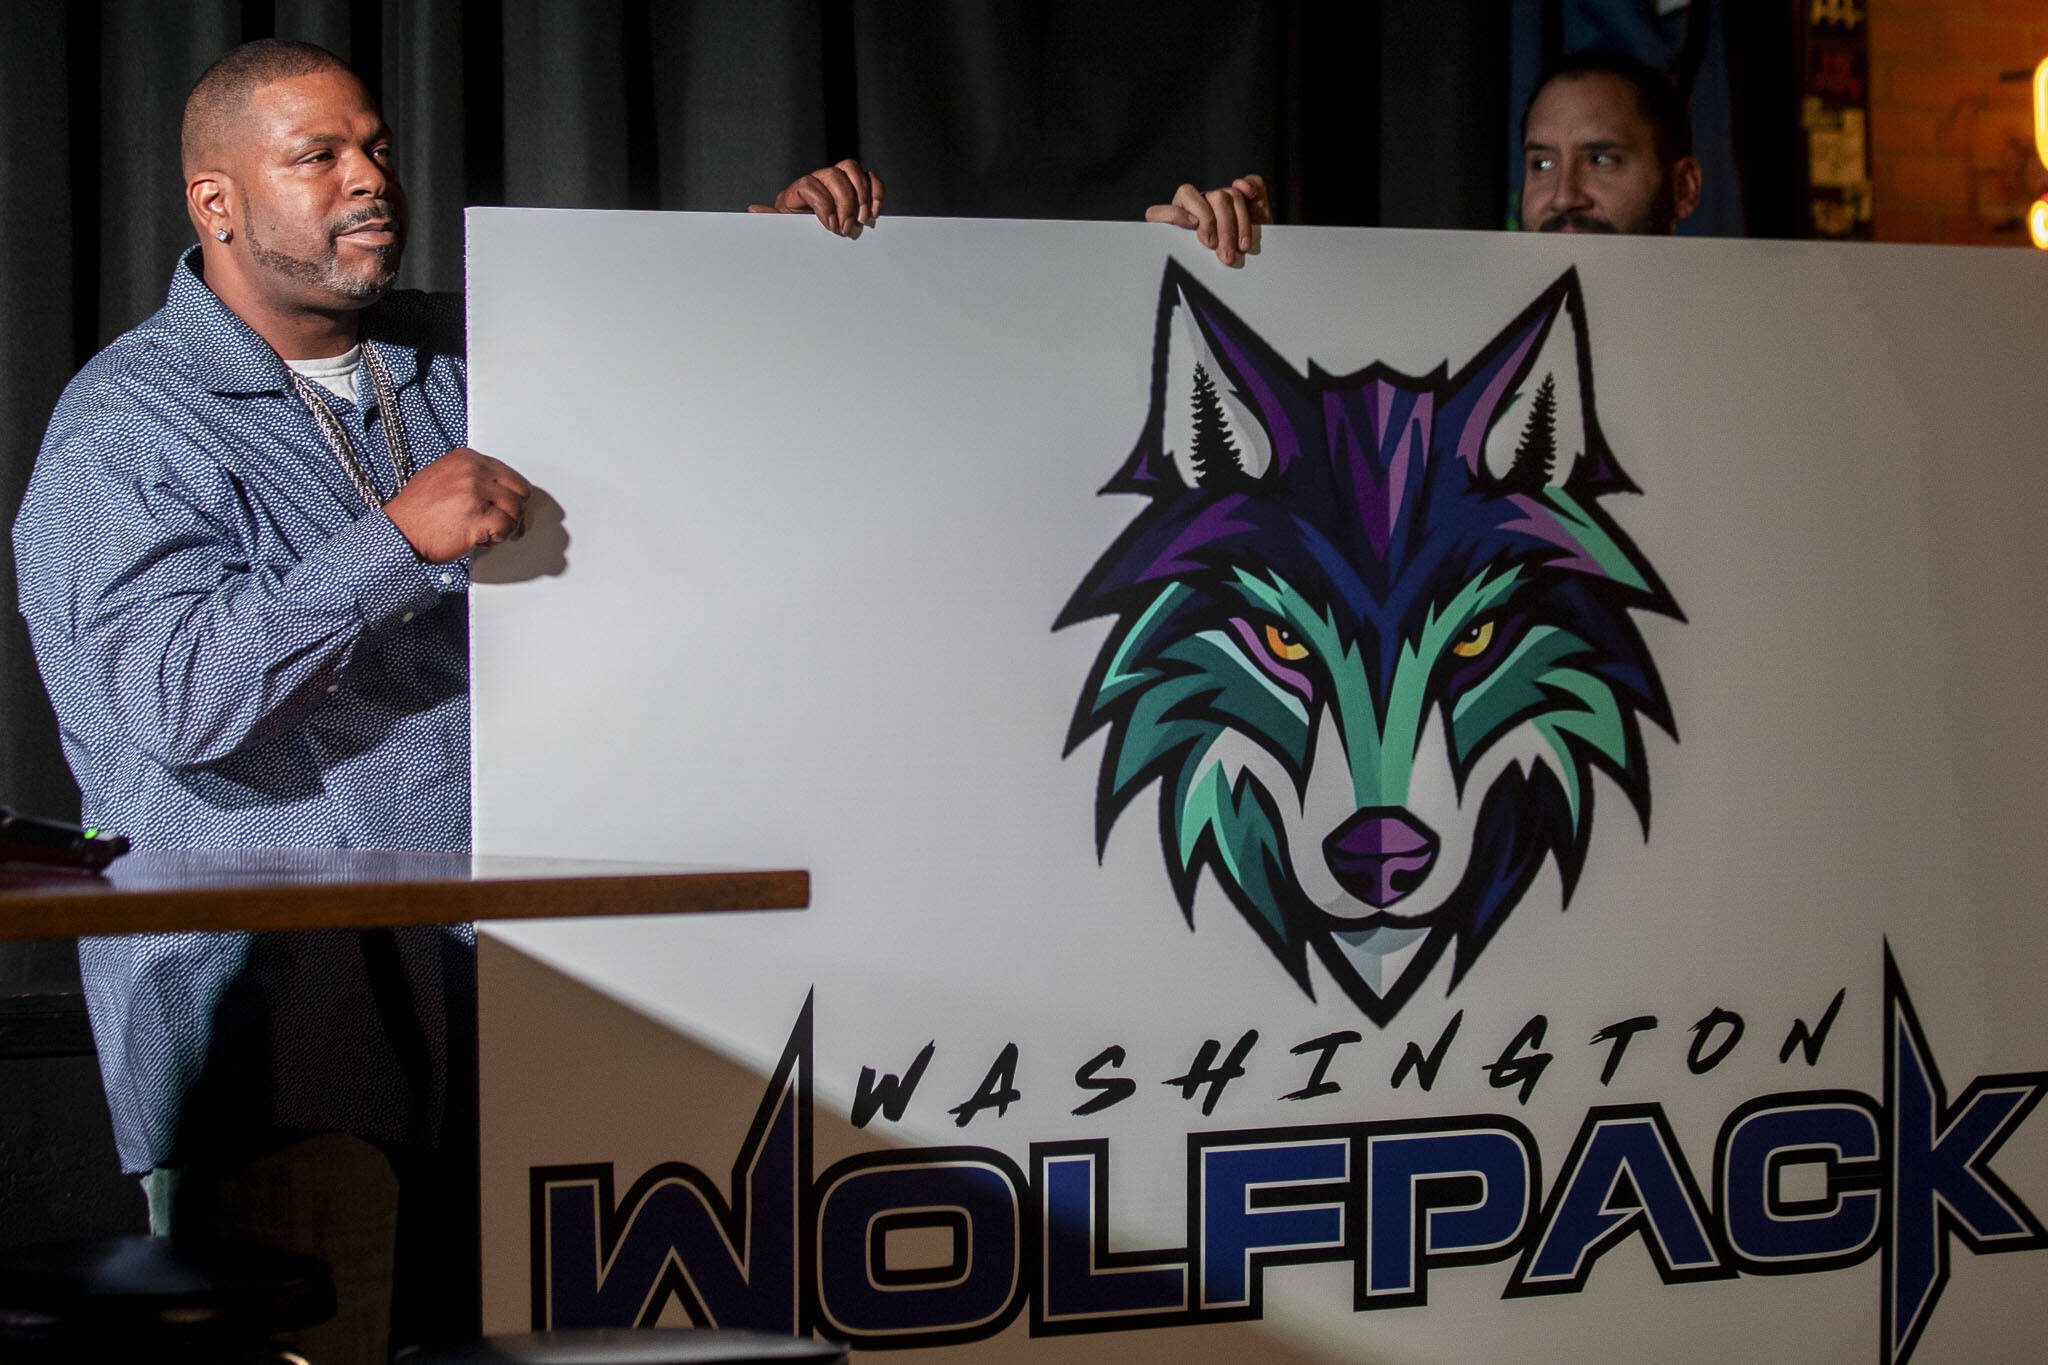 The Washington Wolfpack logo is revealed for Everett’s new AFL team on Oct. 26, 2023, at Tony V’s Garage in Everett. (Annie Barker / The Herald)